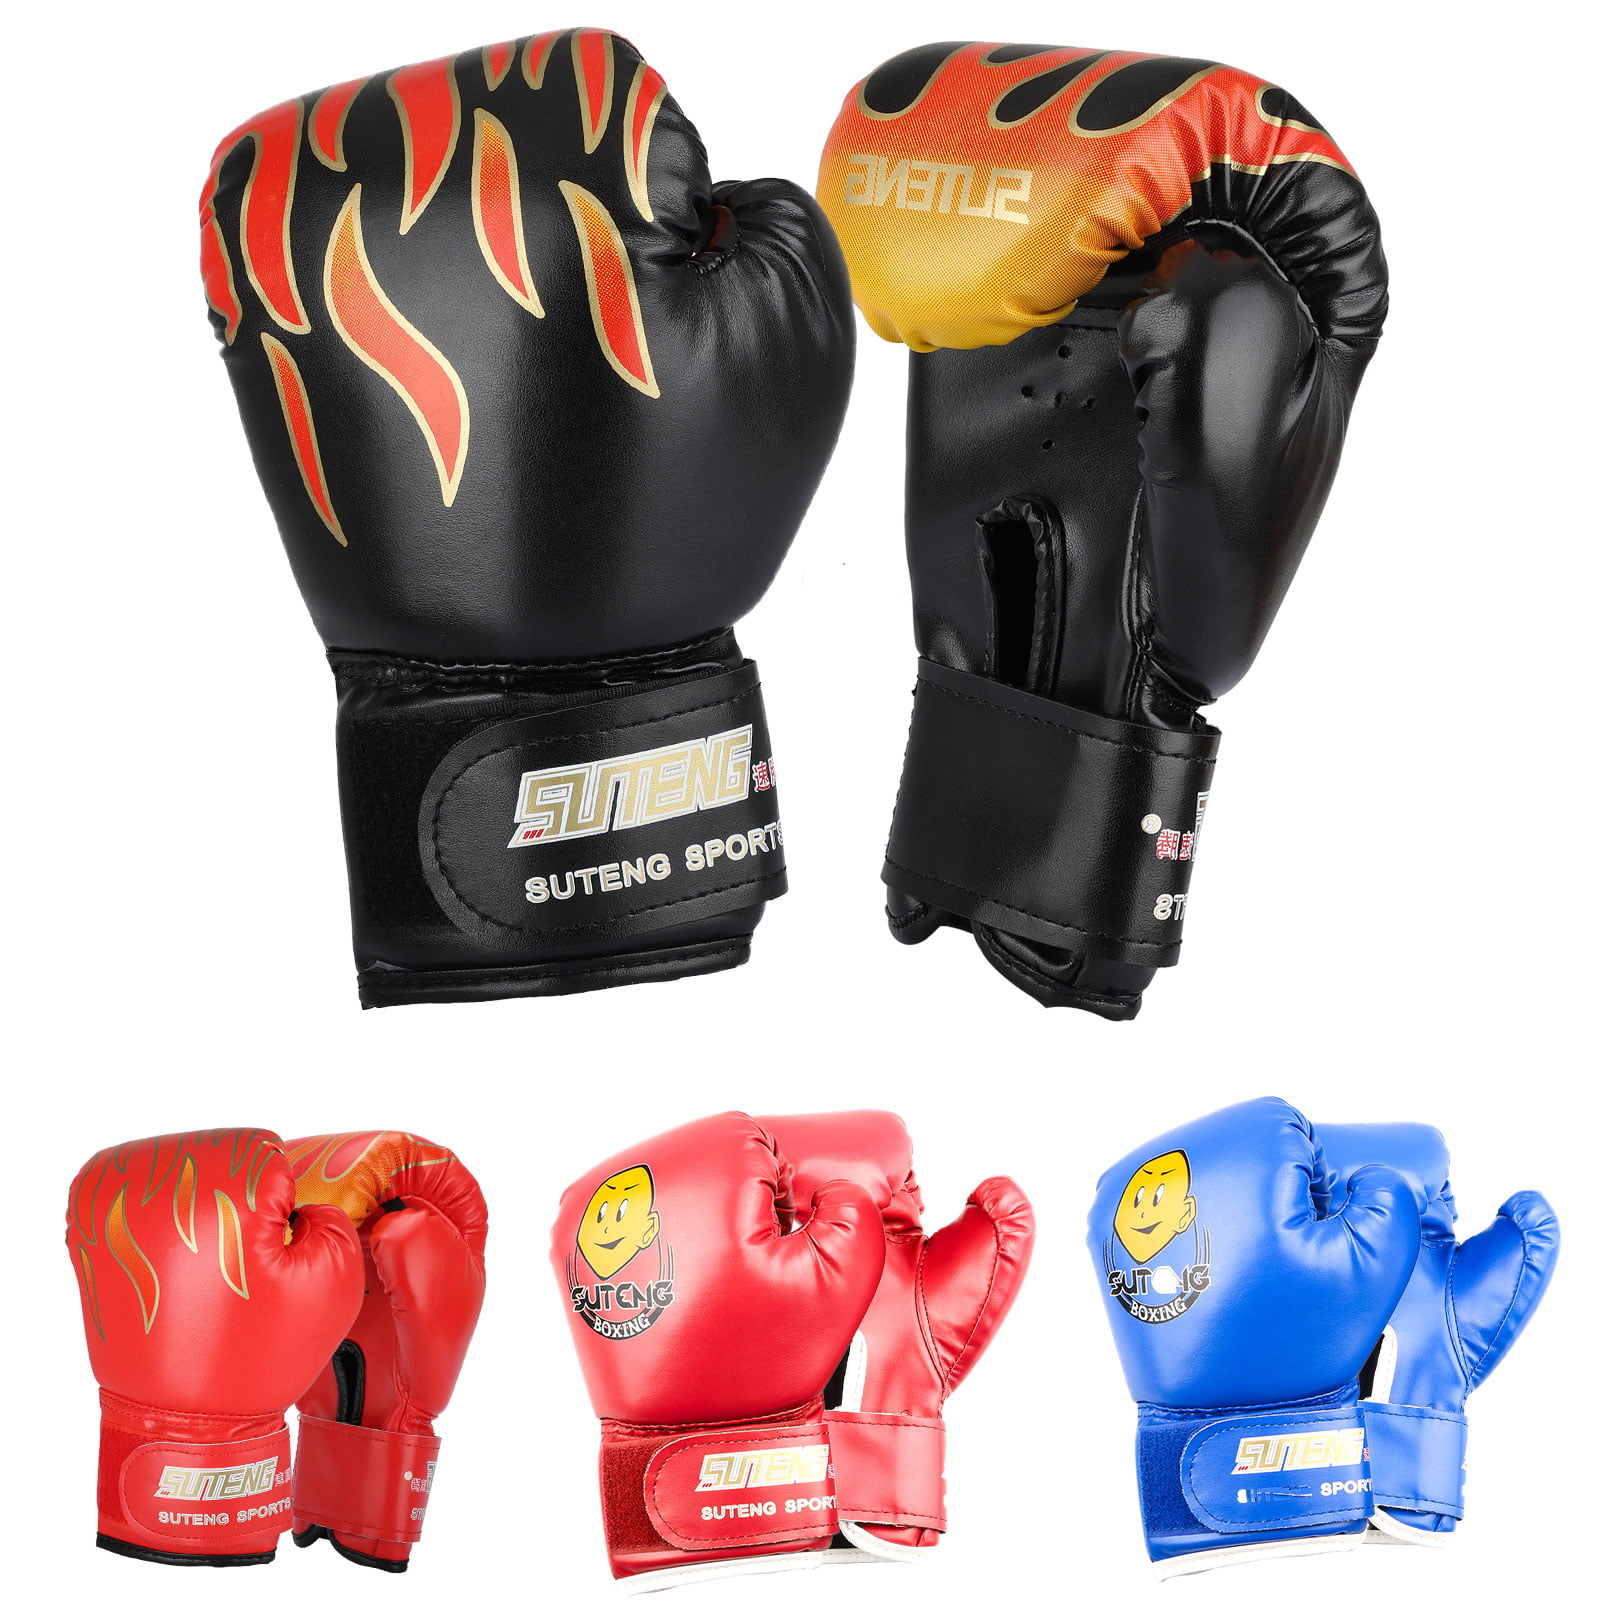 Age 3 to 7 Years Child Punching Bag Sparring Training Sports Training Gloves for Children with High-Grade PU Leather Muay Thai Suit for Kickboxing Kids Boxing Gloves Blue